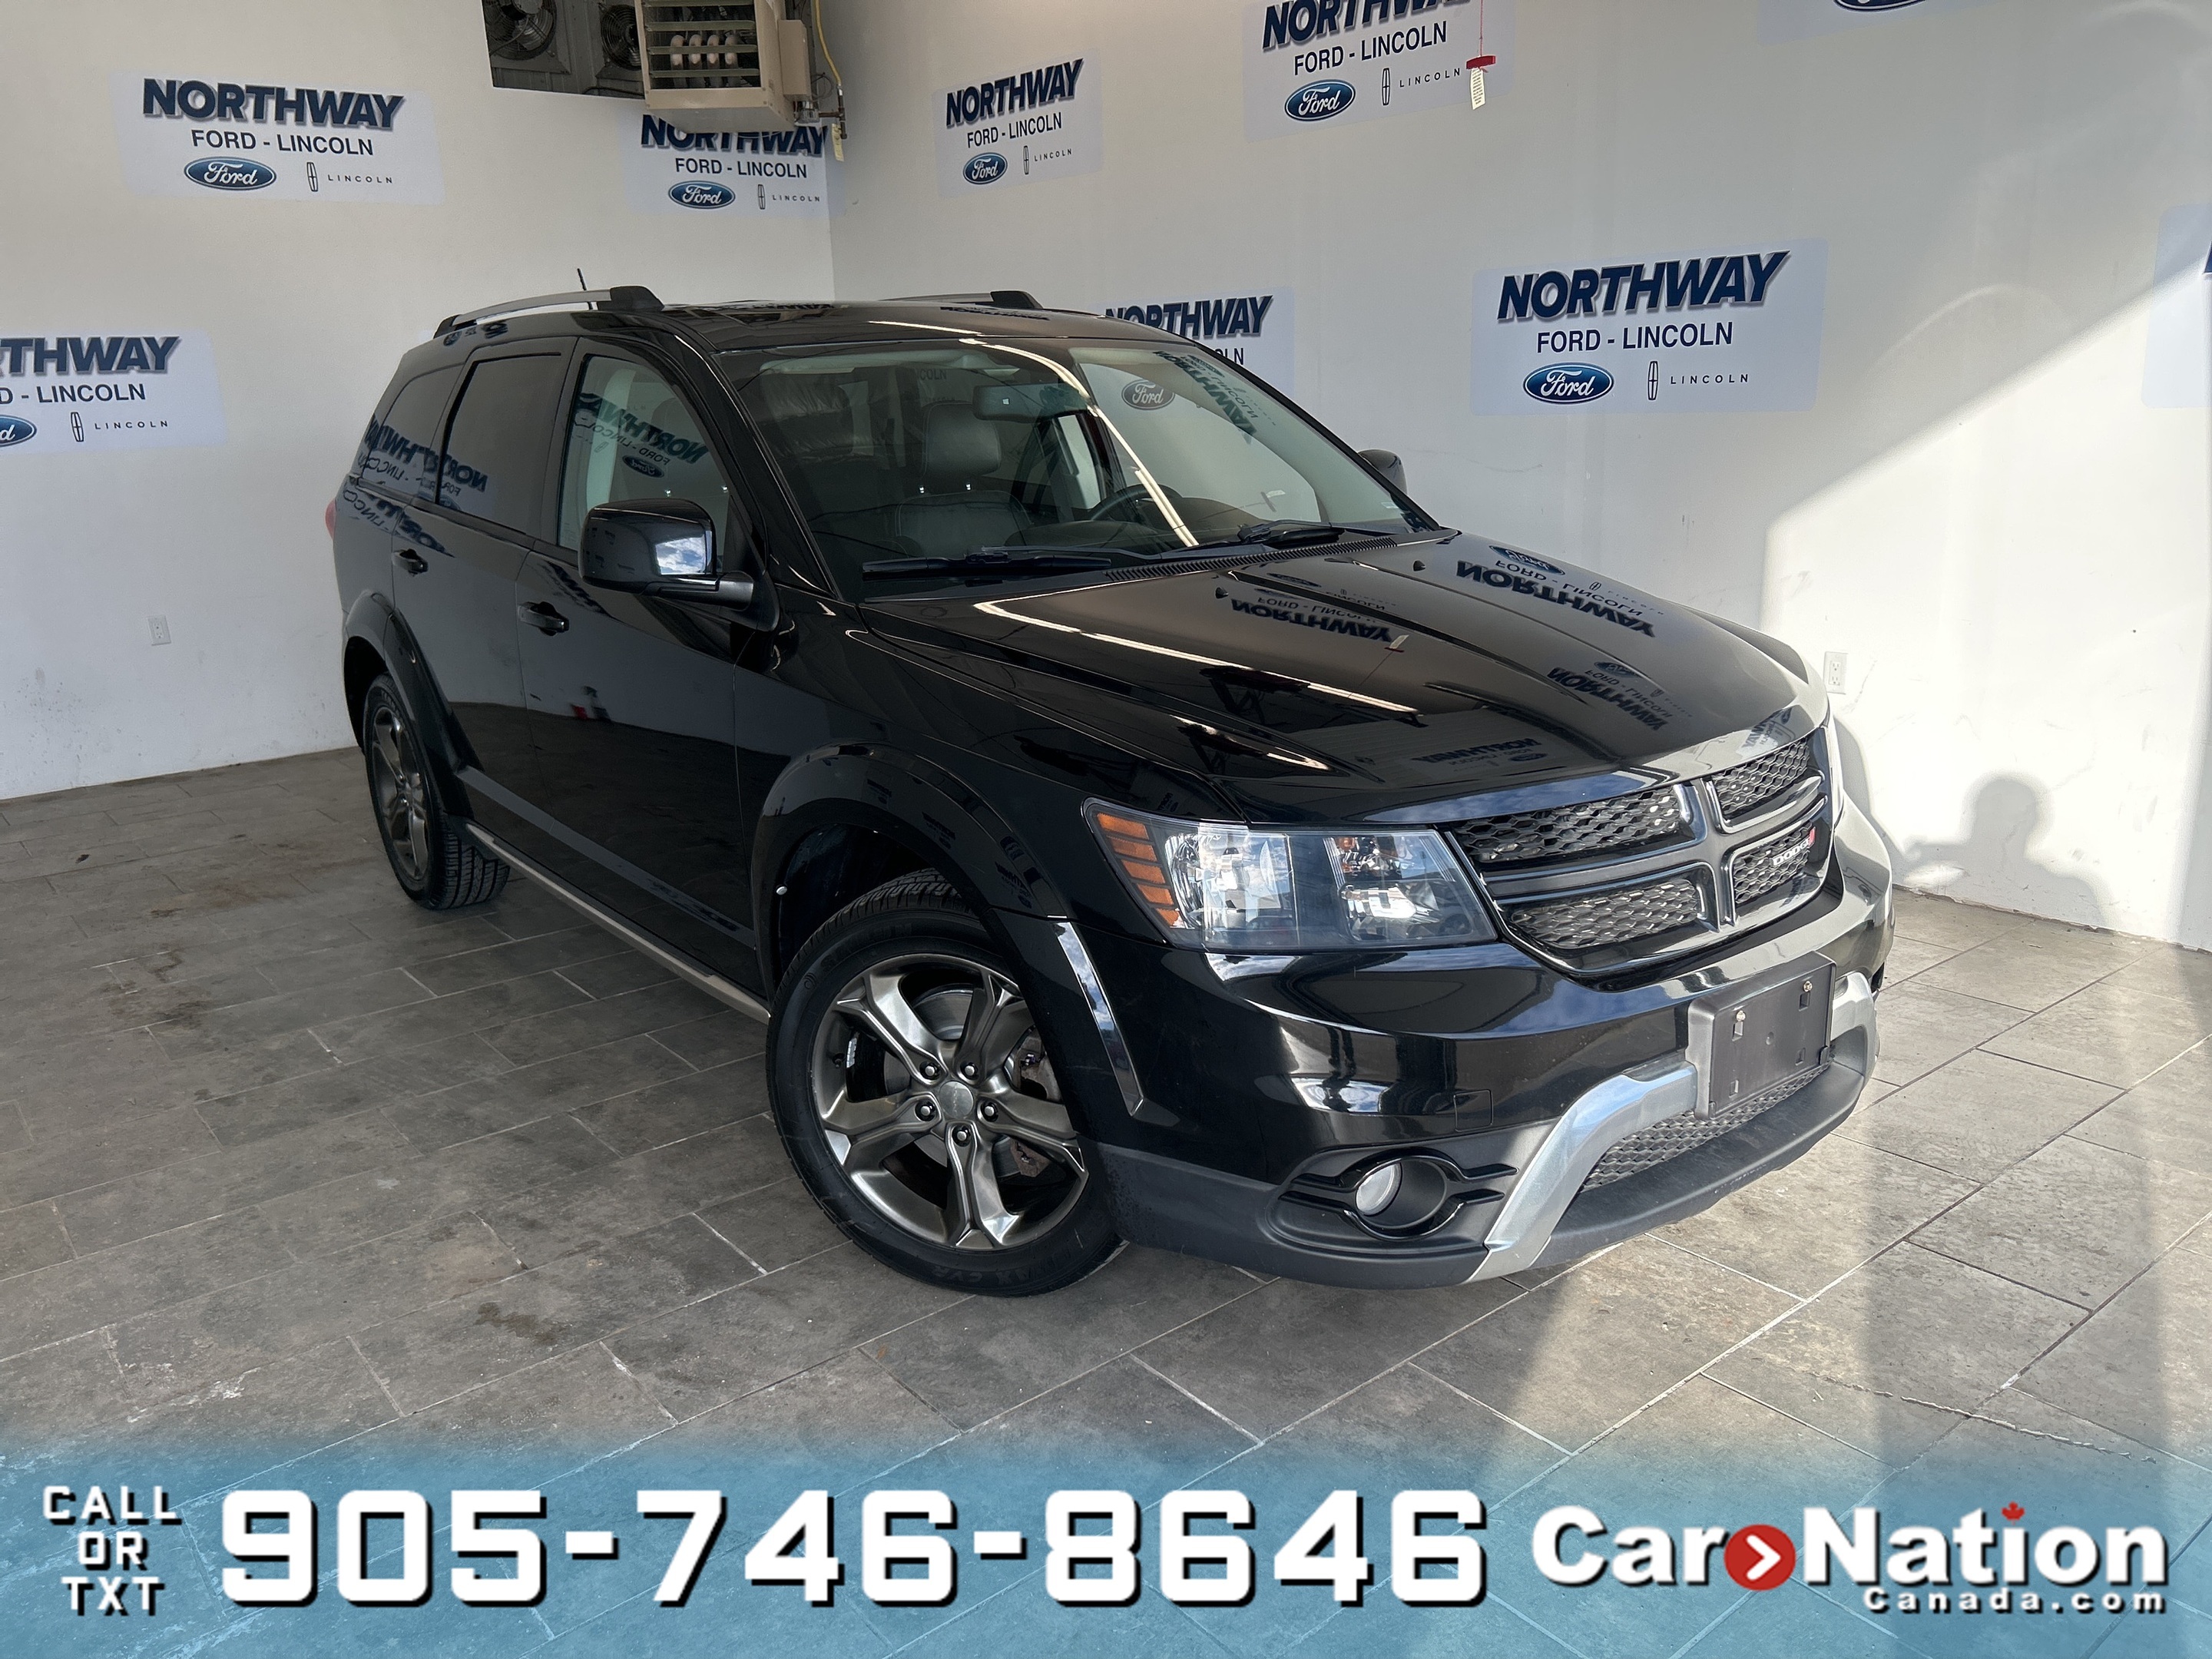 2015 Dodge Journey CROSSROAD |LEATHER | 8.4" SCREEN | SUNROOF |7 PASS